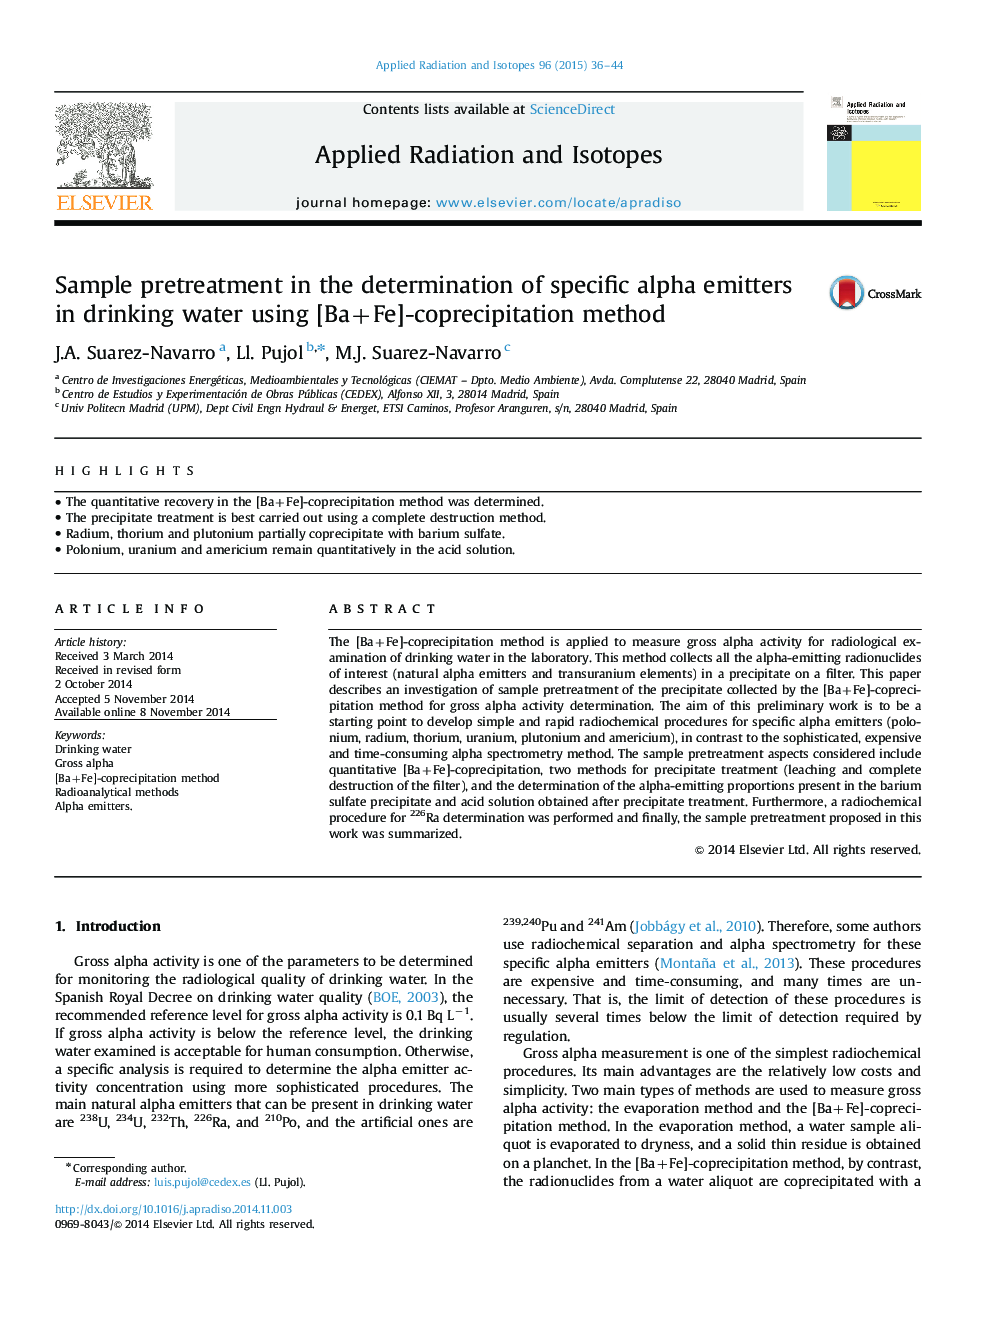 Sample pretreatment in the determination of specific alpha emitters in drinking water using [Ba+Fe]-coprecipitation method